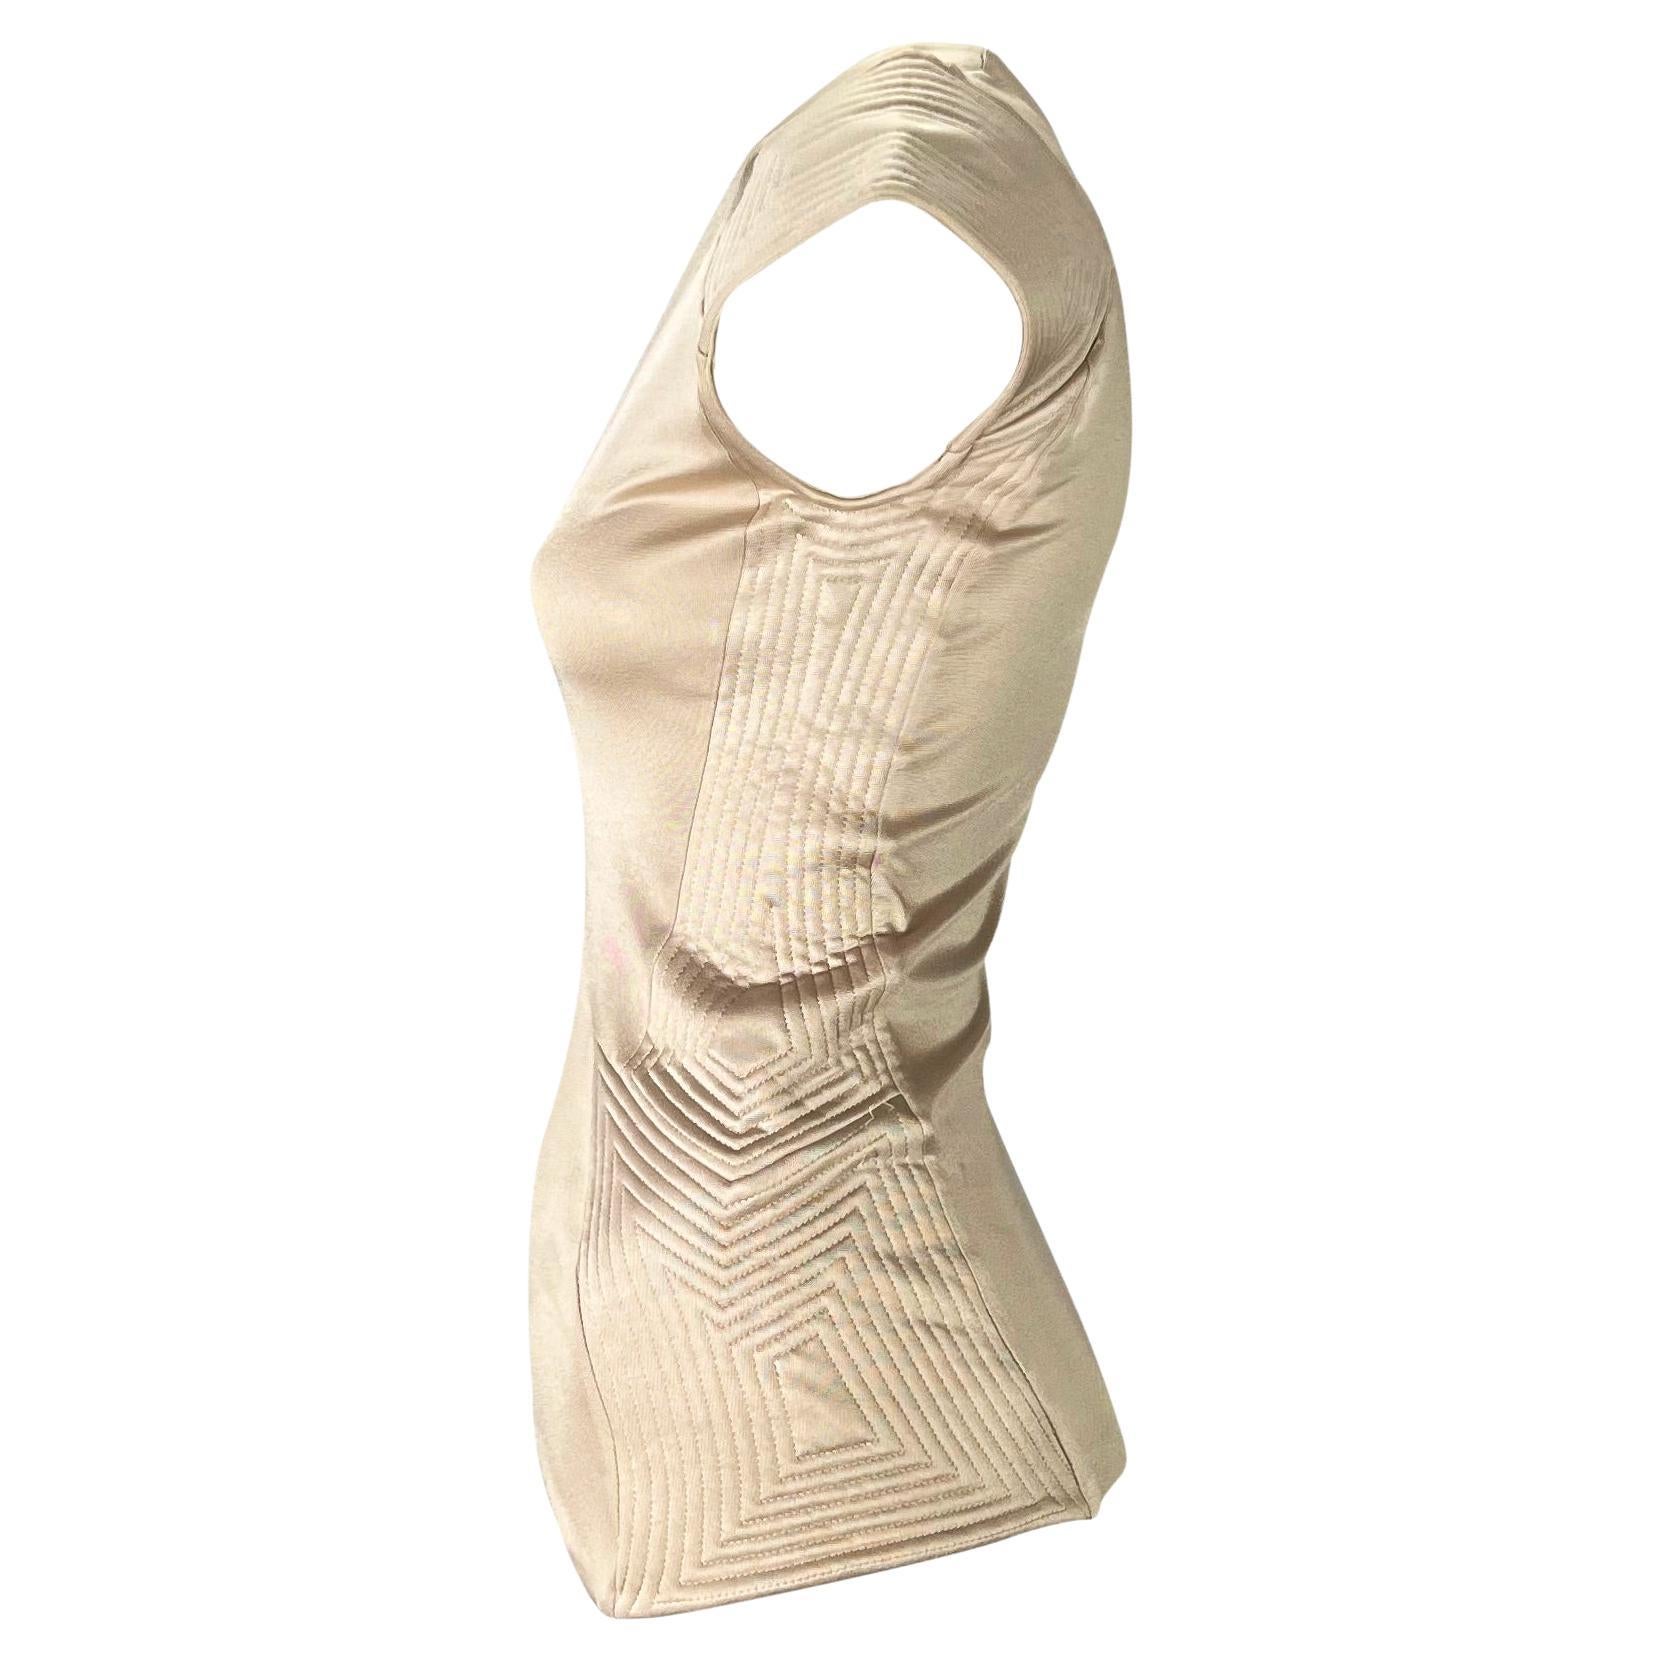 Women's F/W 2004 Yves Saint Laurent by Tom Ford Champagne Quilted Sleeveless Top For Sale